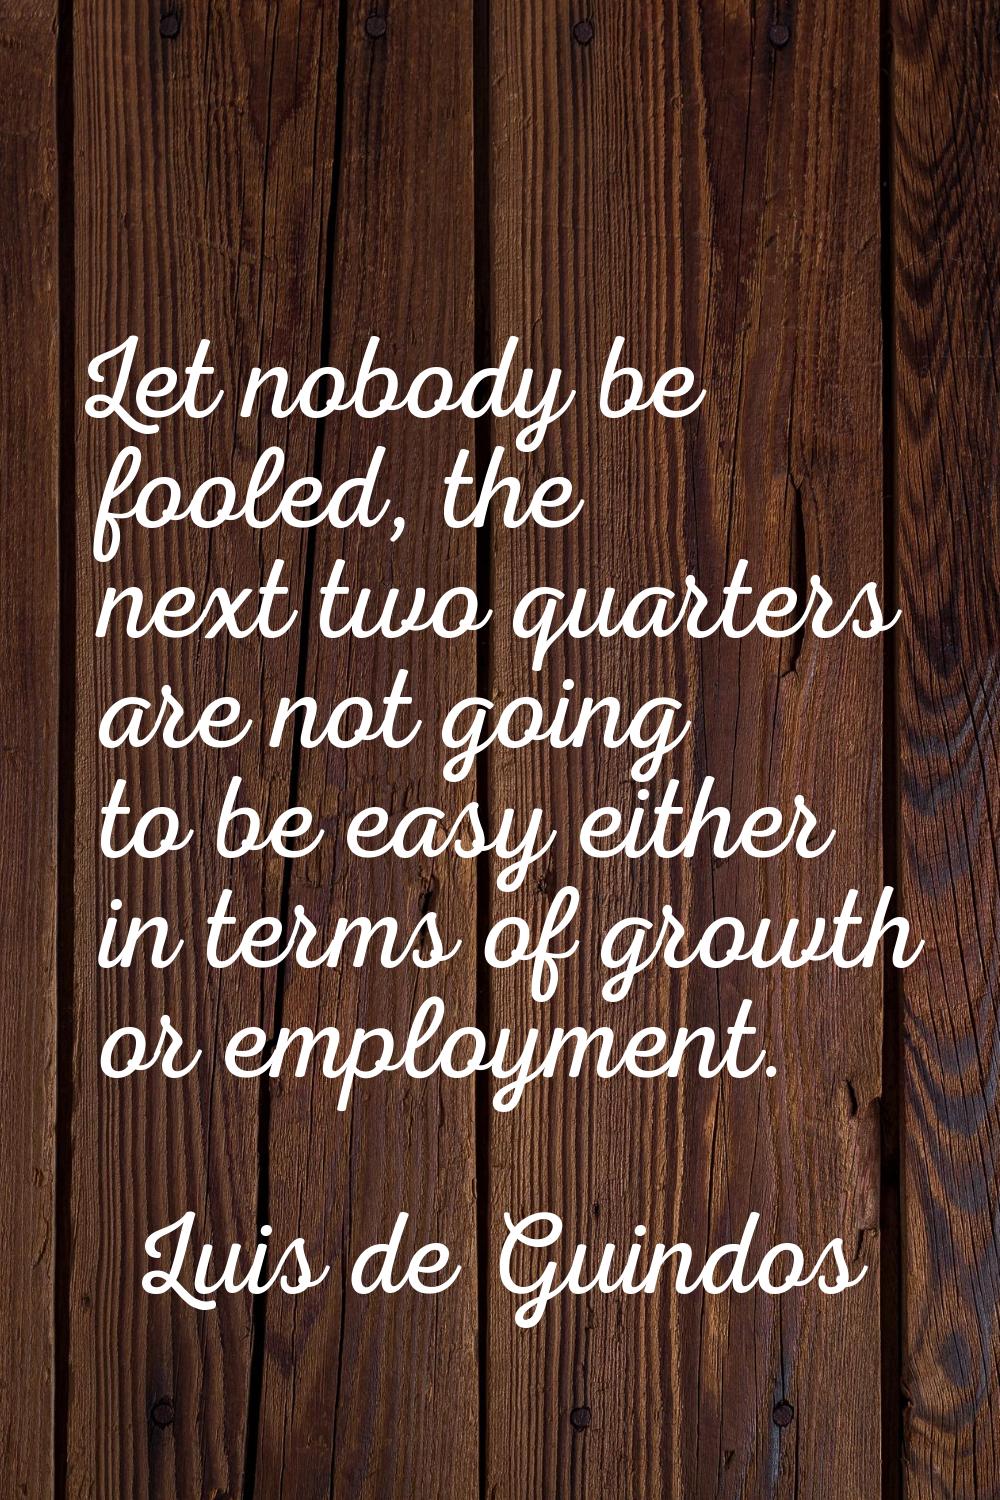 Let nobody be fooled, the next two quarters are not going to be easy either in terms of growth or e